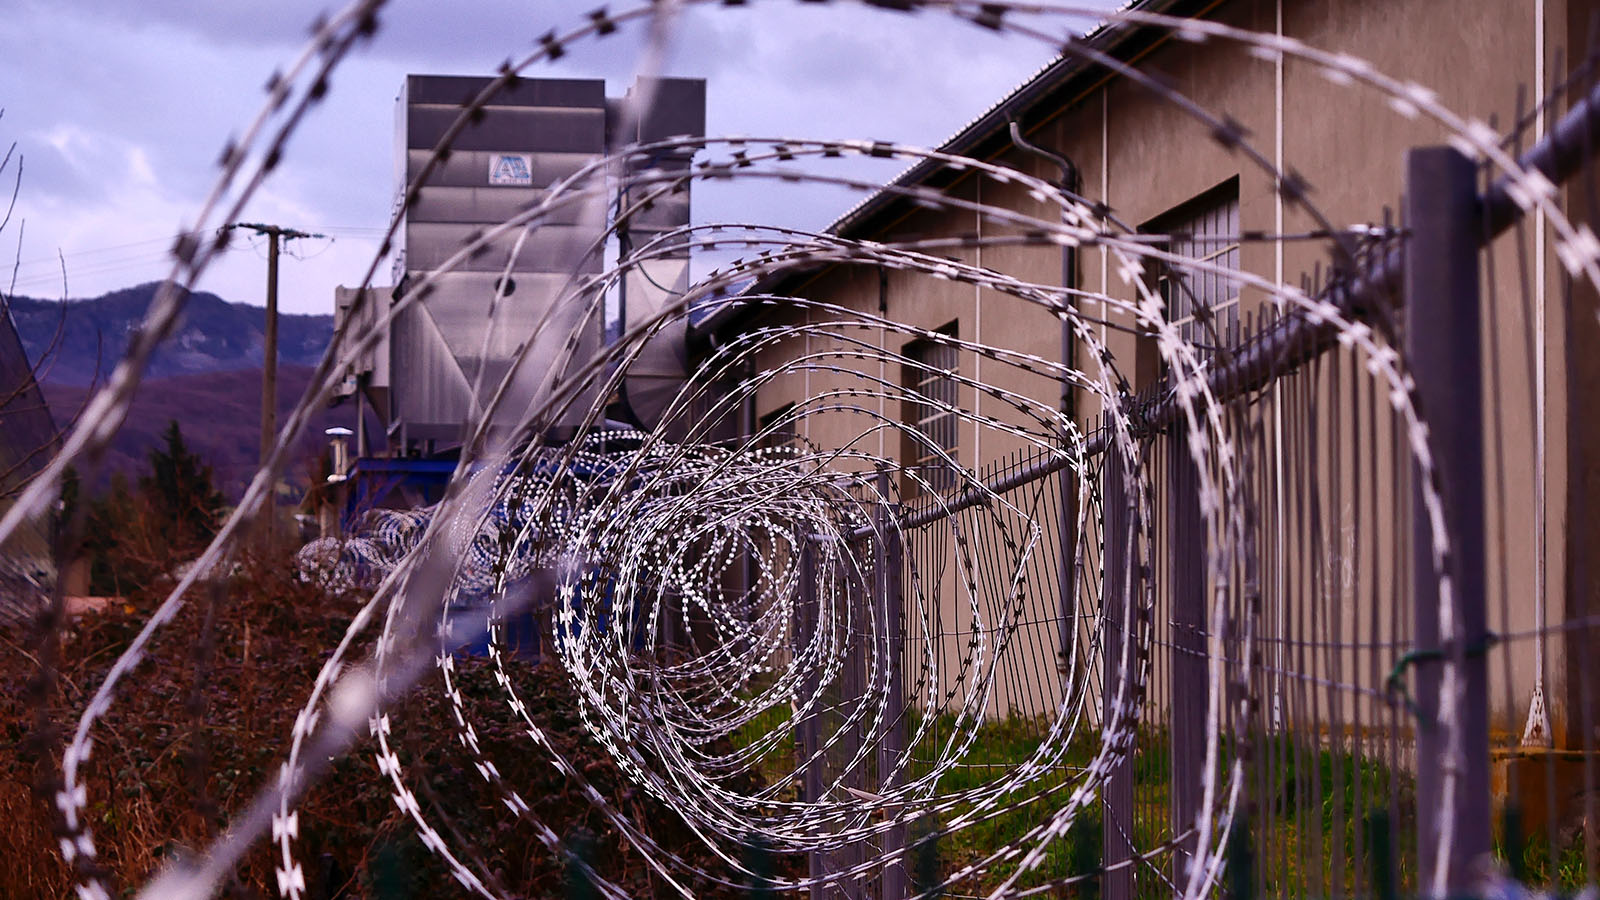 A view of barbed wire in front of a prison